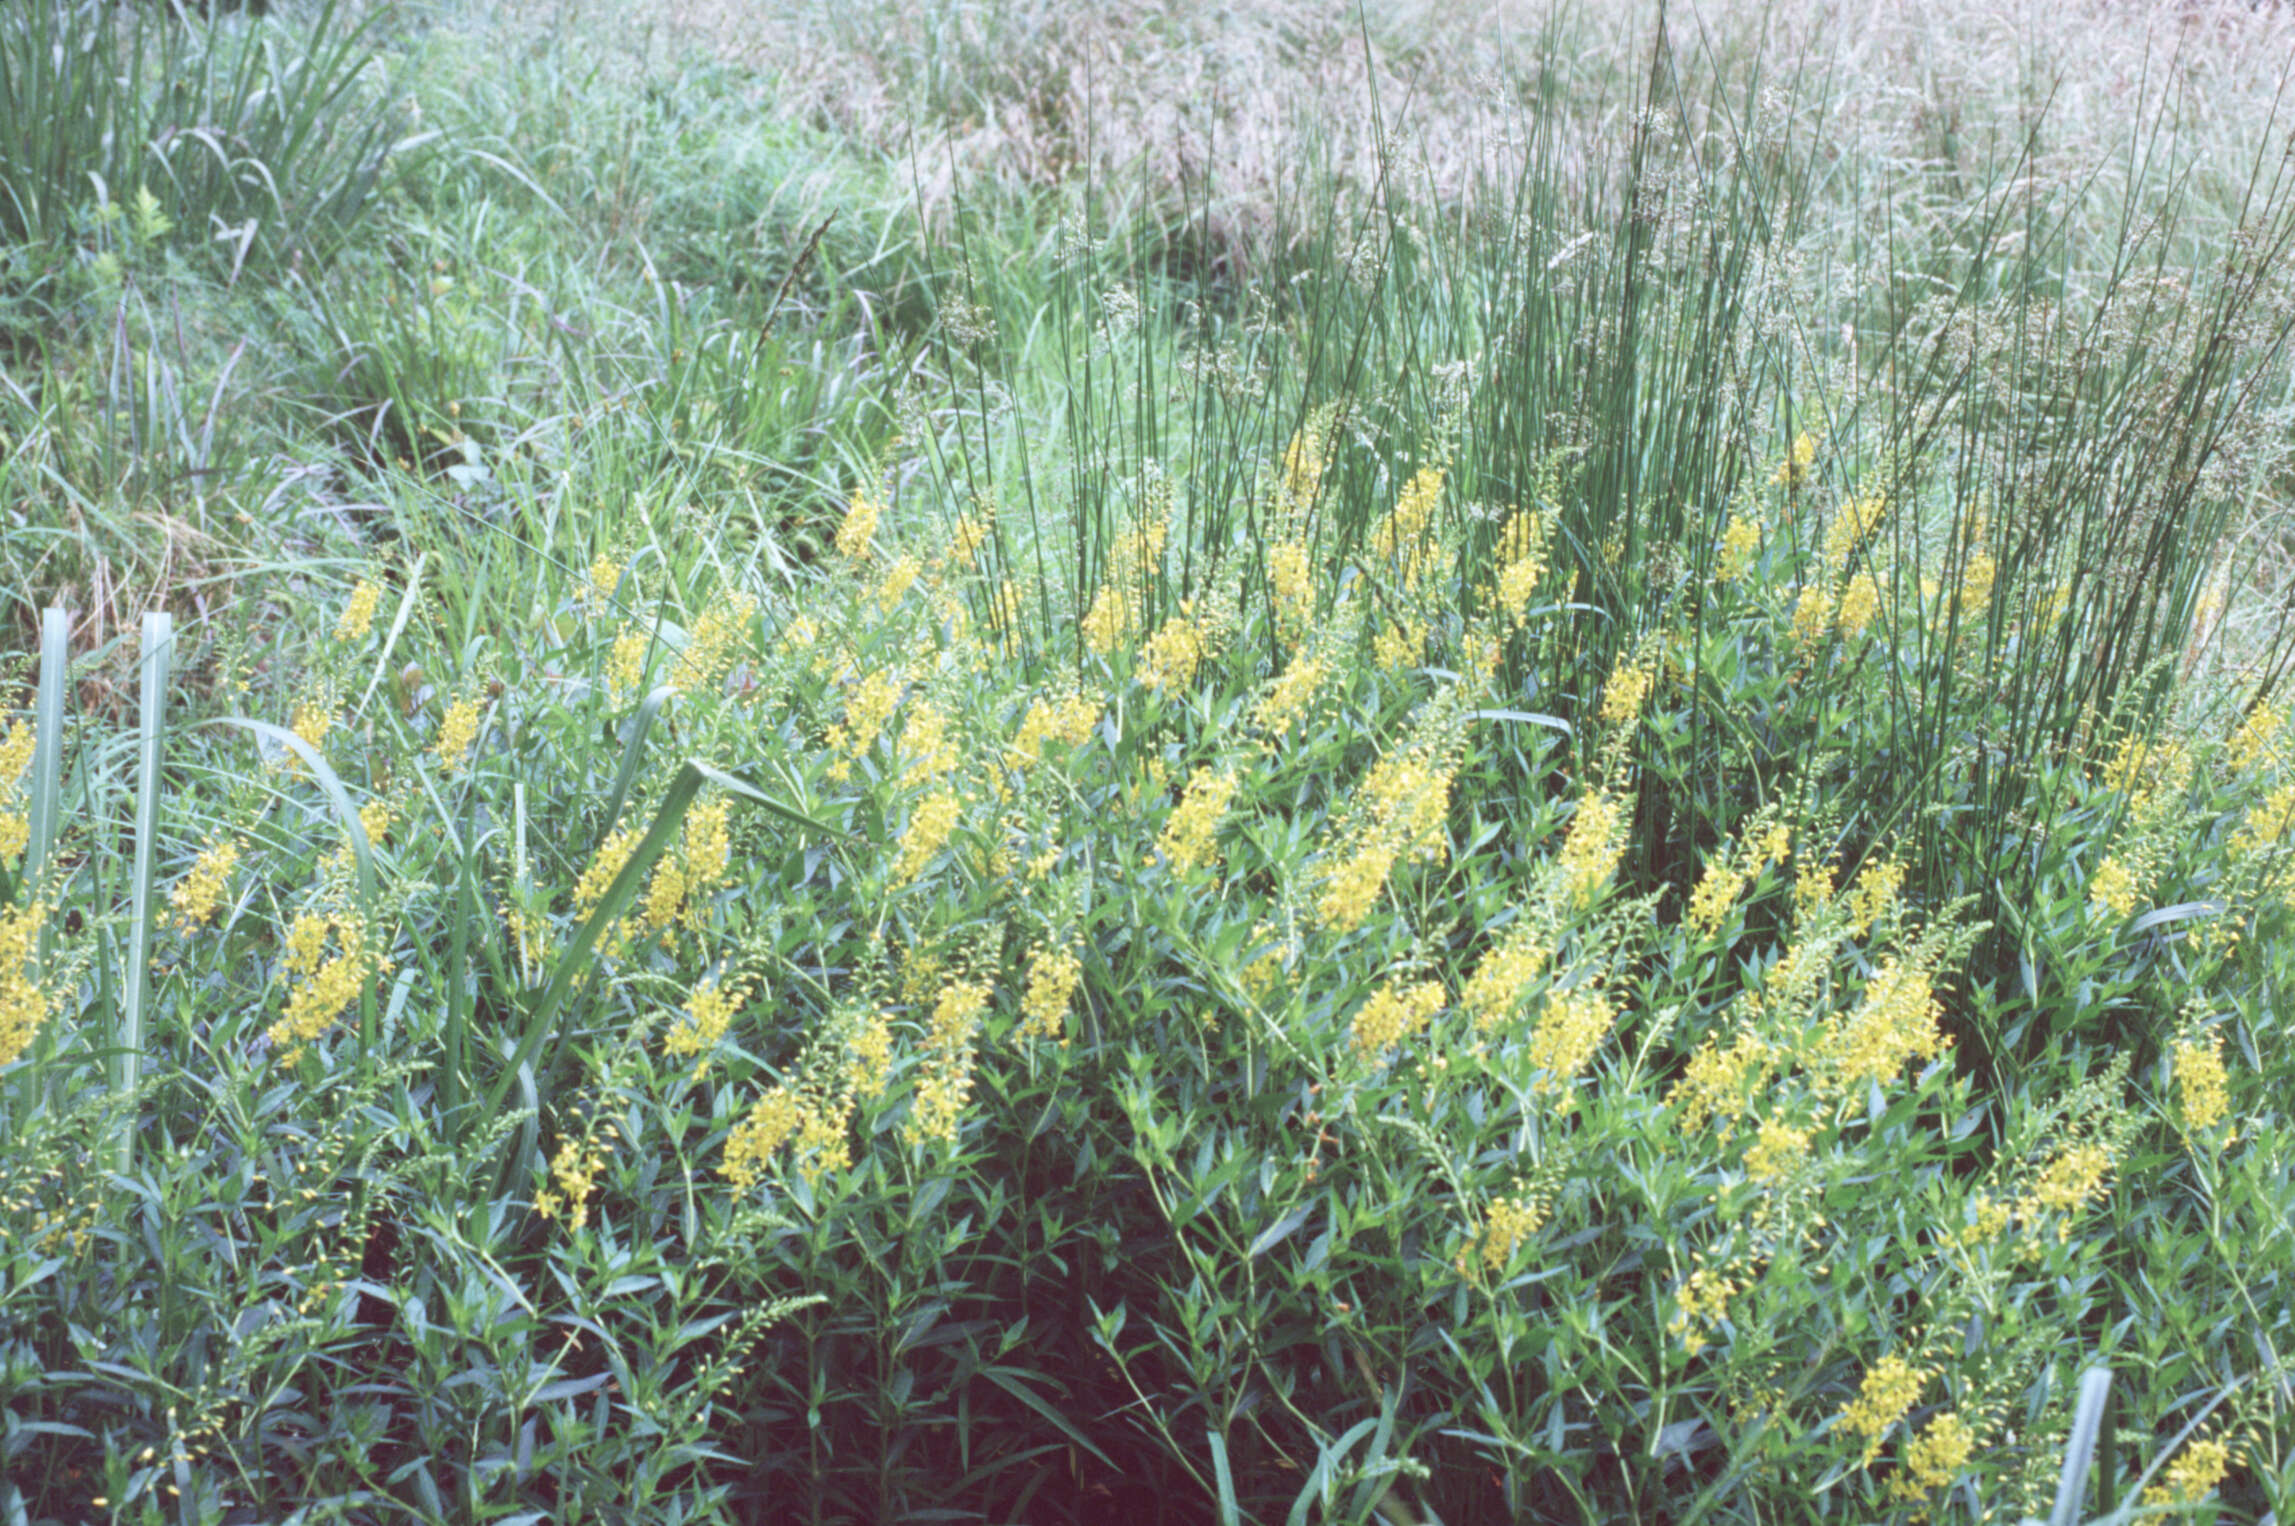 Image of earth loosestrife